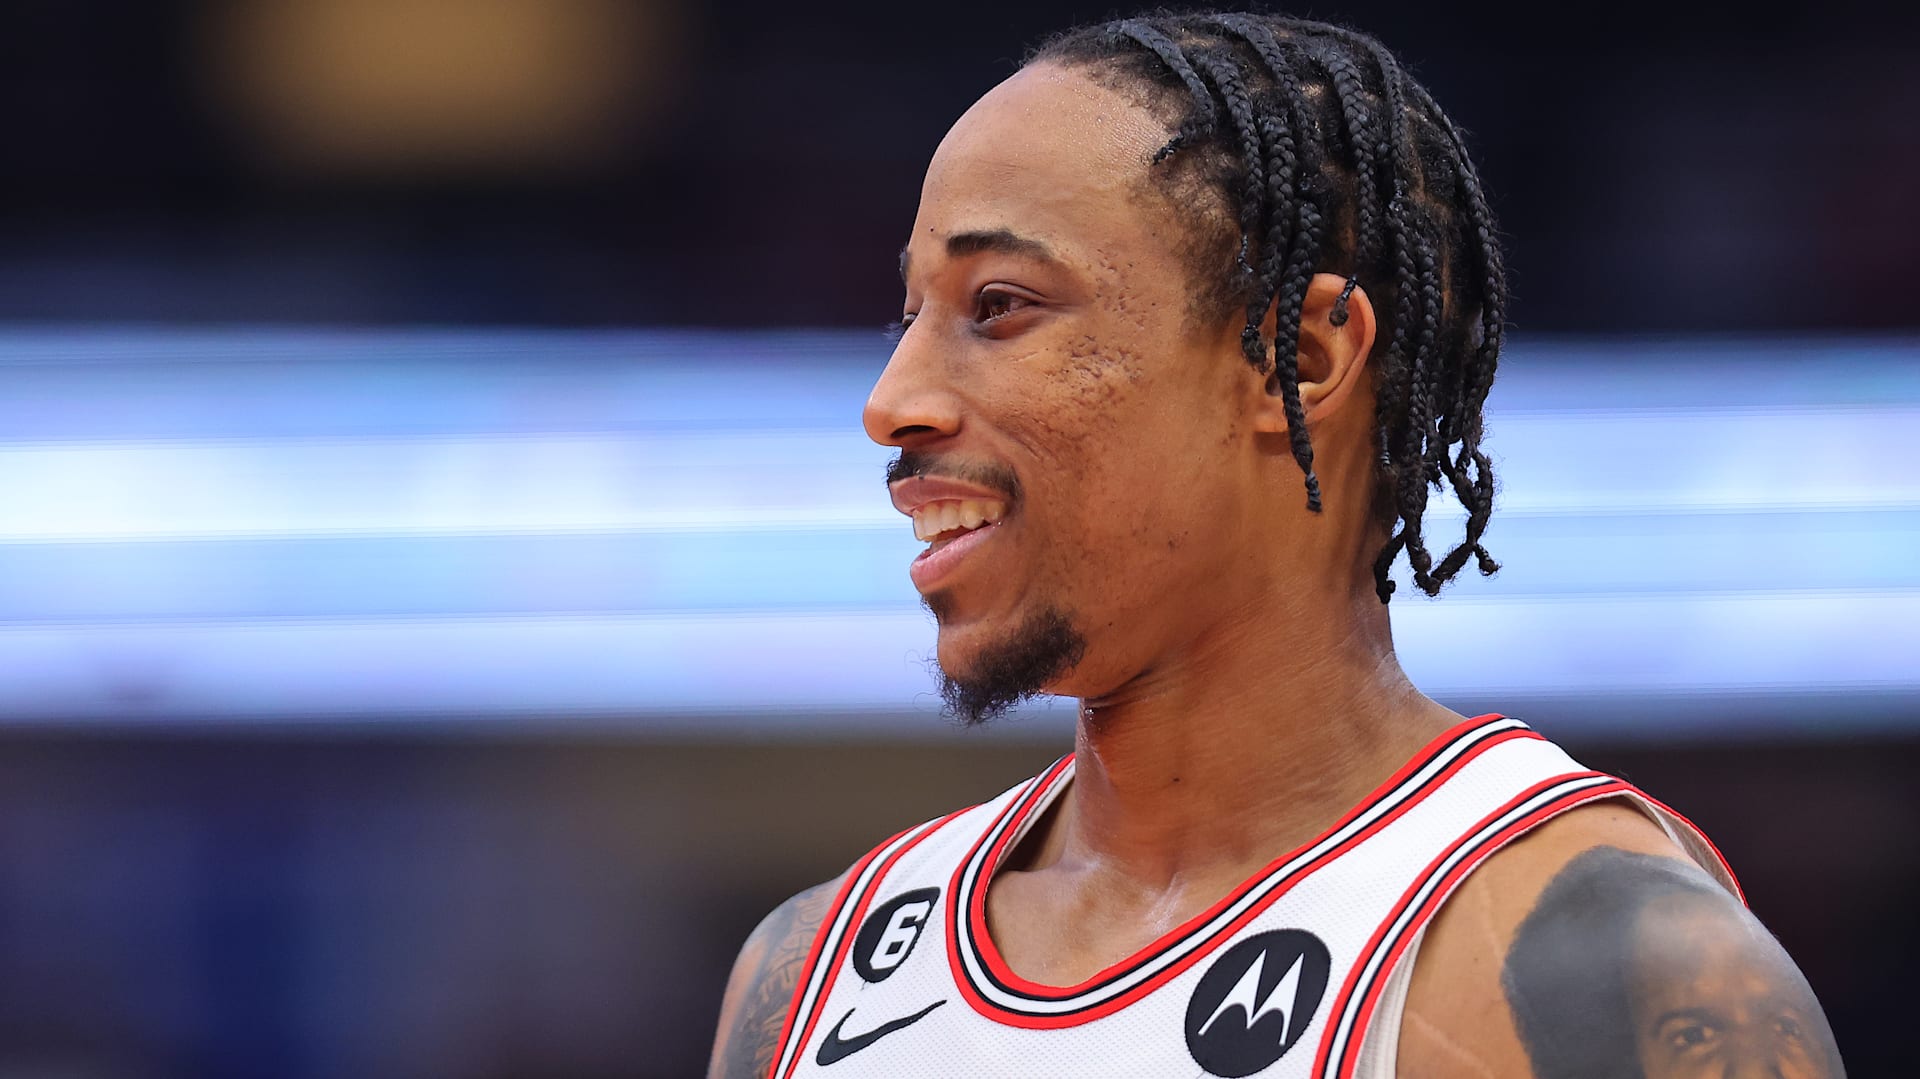 Olympic Champion DeMar DeRozan says “It would definitely be tough to say  no” to an invitation to Paris 2024 – Here's why he shouldn't